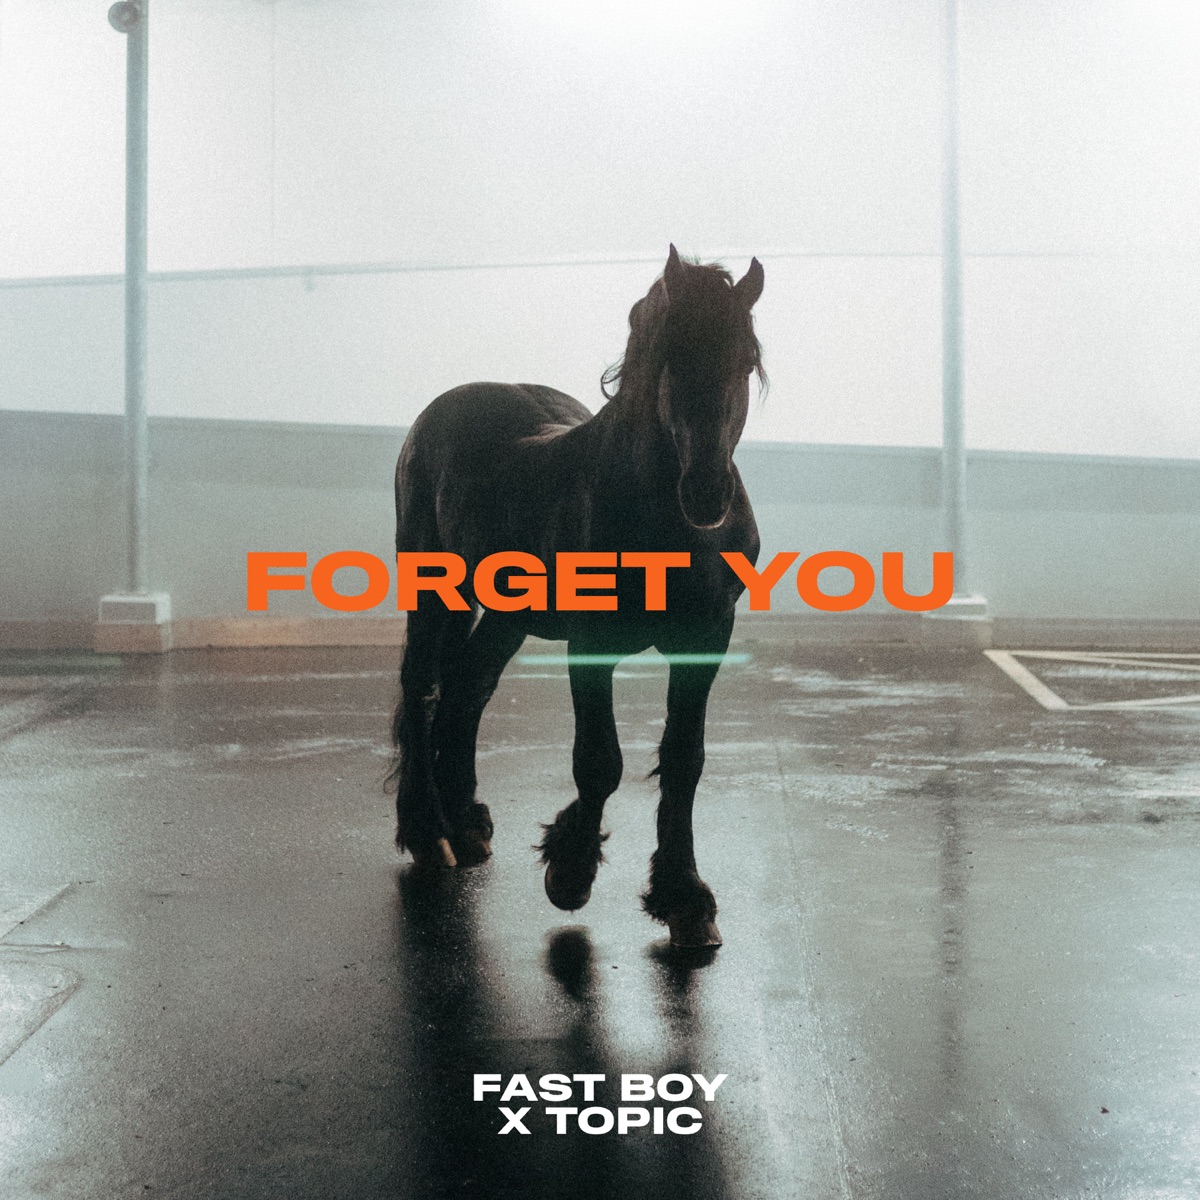 Boy topic. Forget you fast boy topic. Fast boy (feat. Topic) forget you. Forget you fast boy. Fast boy & topic.